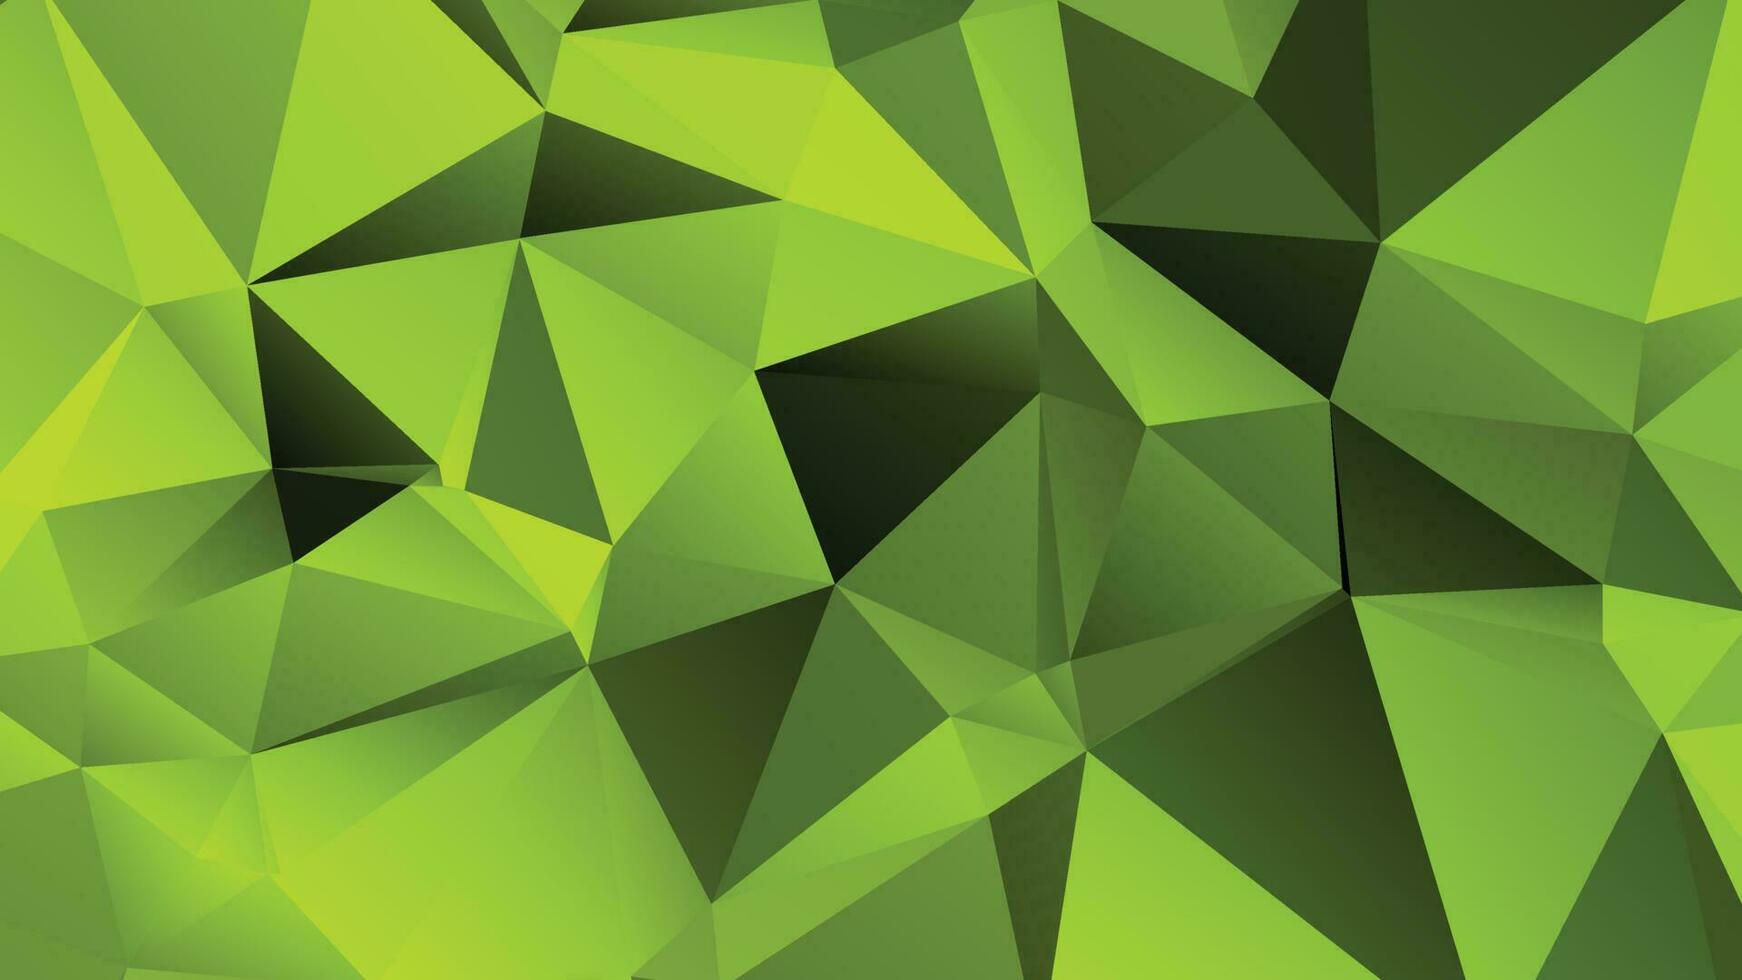 Green Color Polygon Background Design, Abstract Geometric Origami Style With Gradient vector